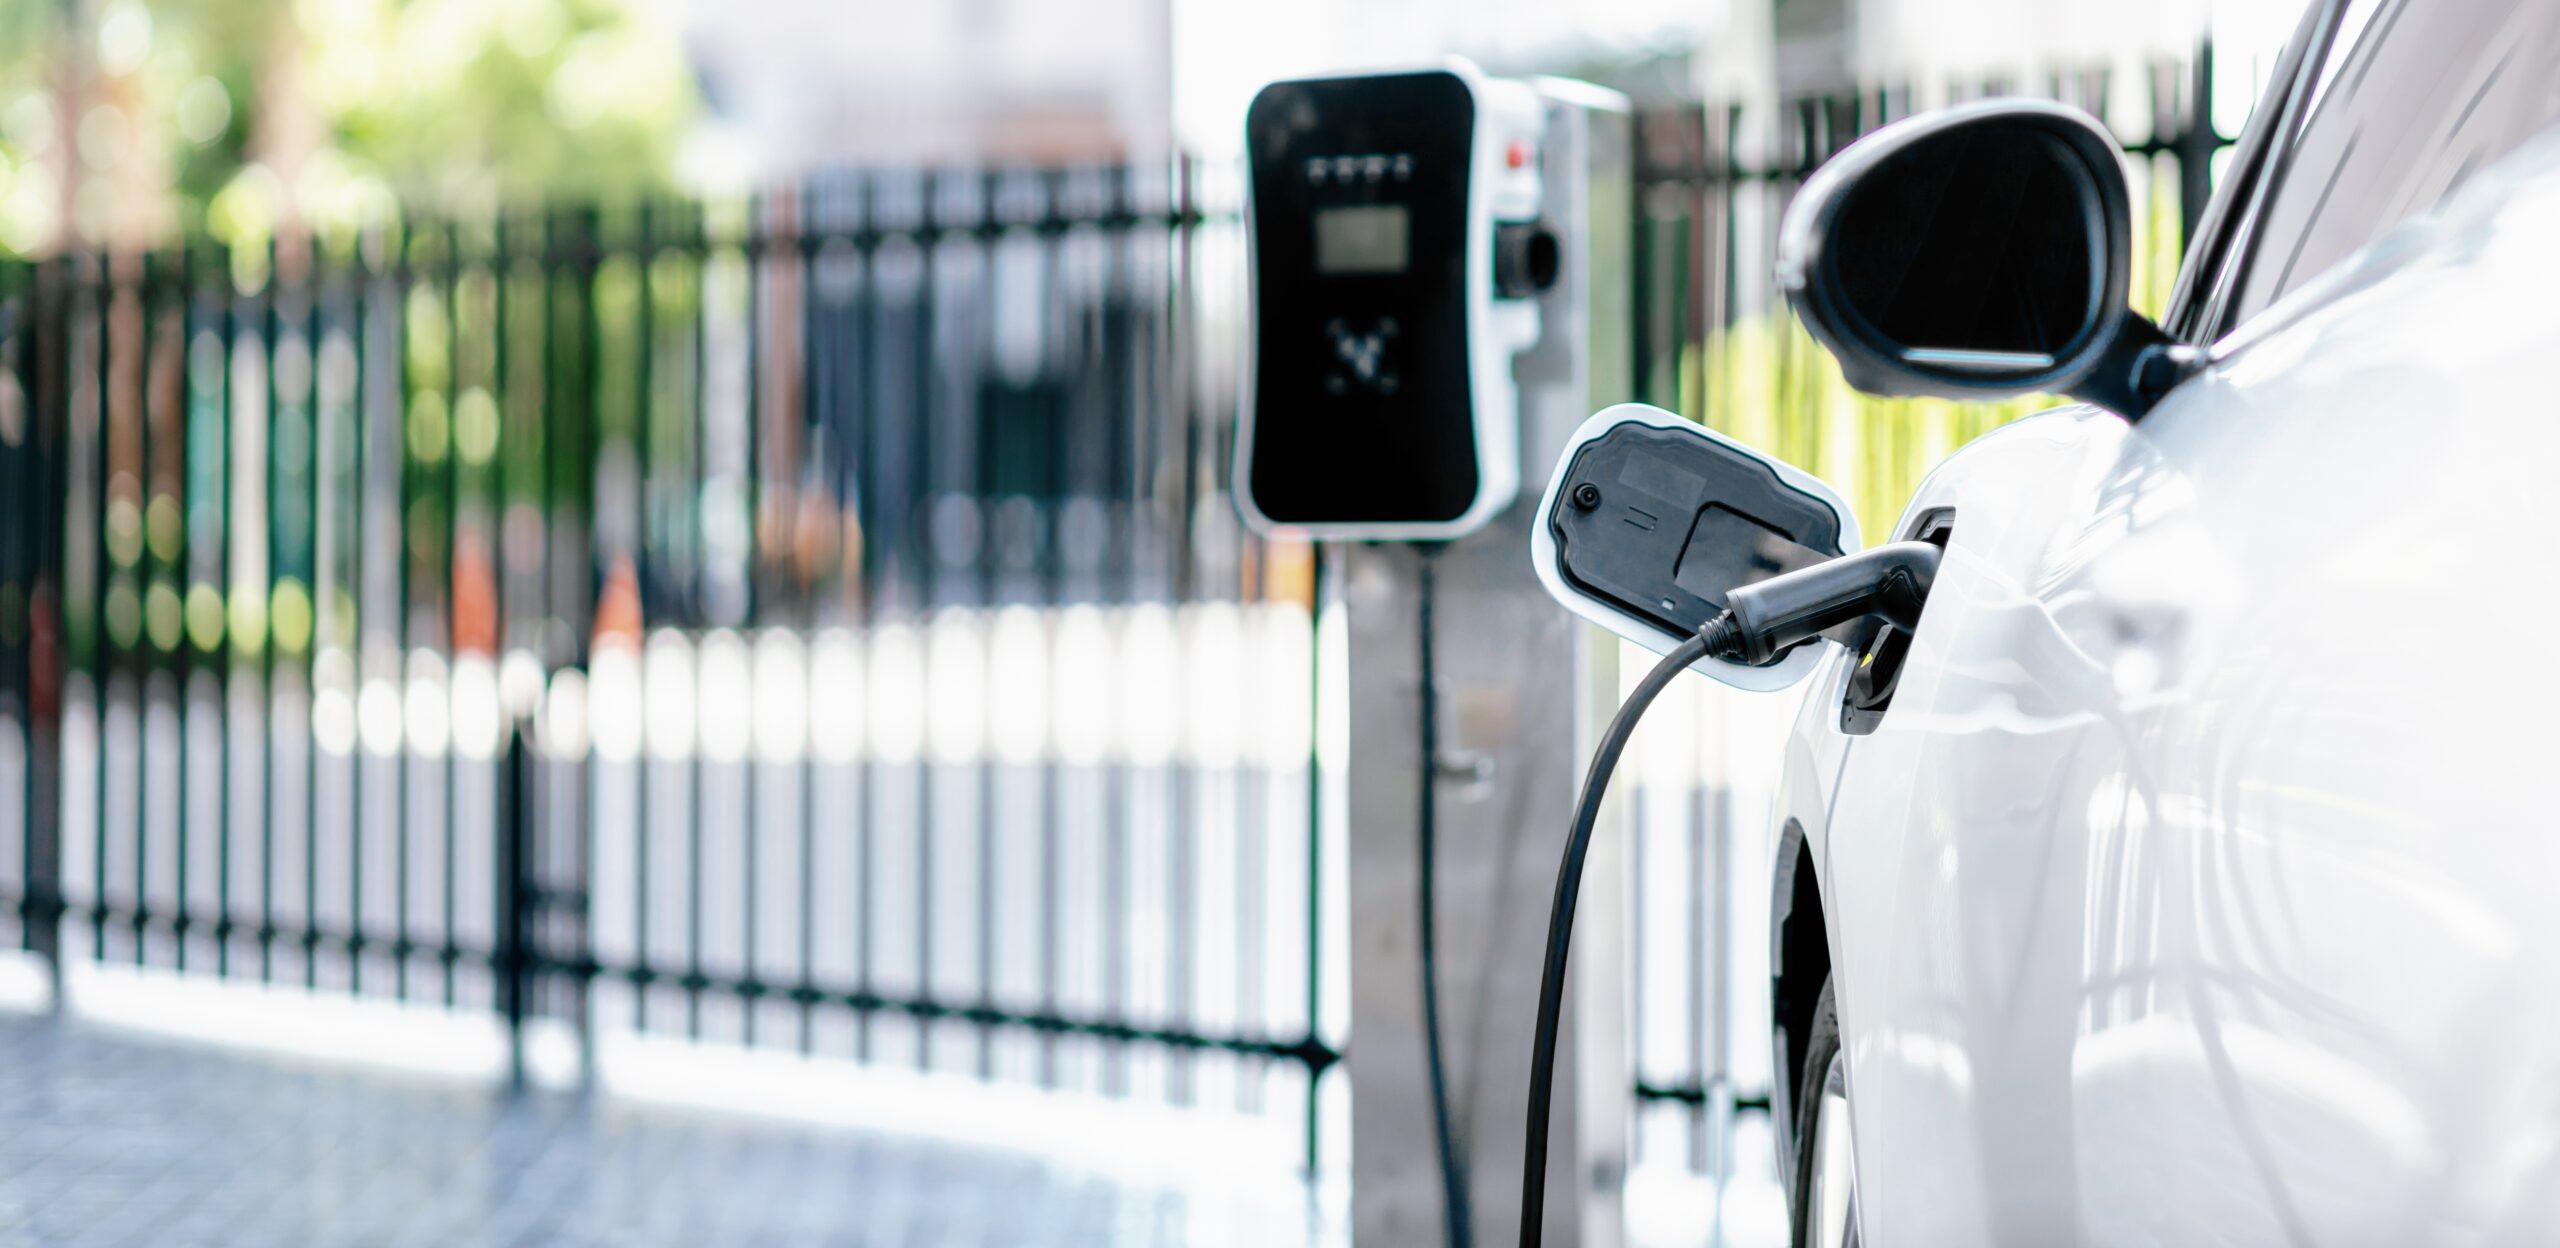 New research outlines the huge opportunity for developers to improve ‘lacking’ public EV charging facilities